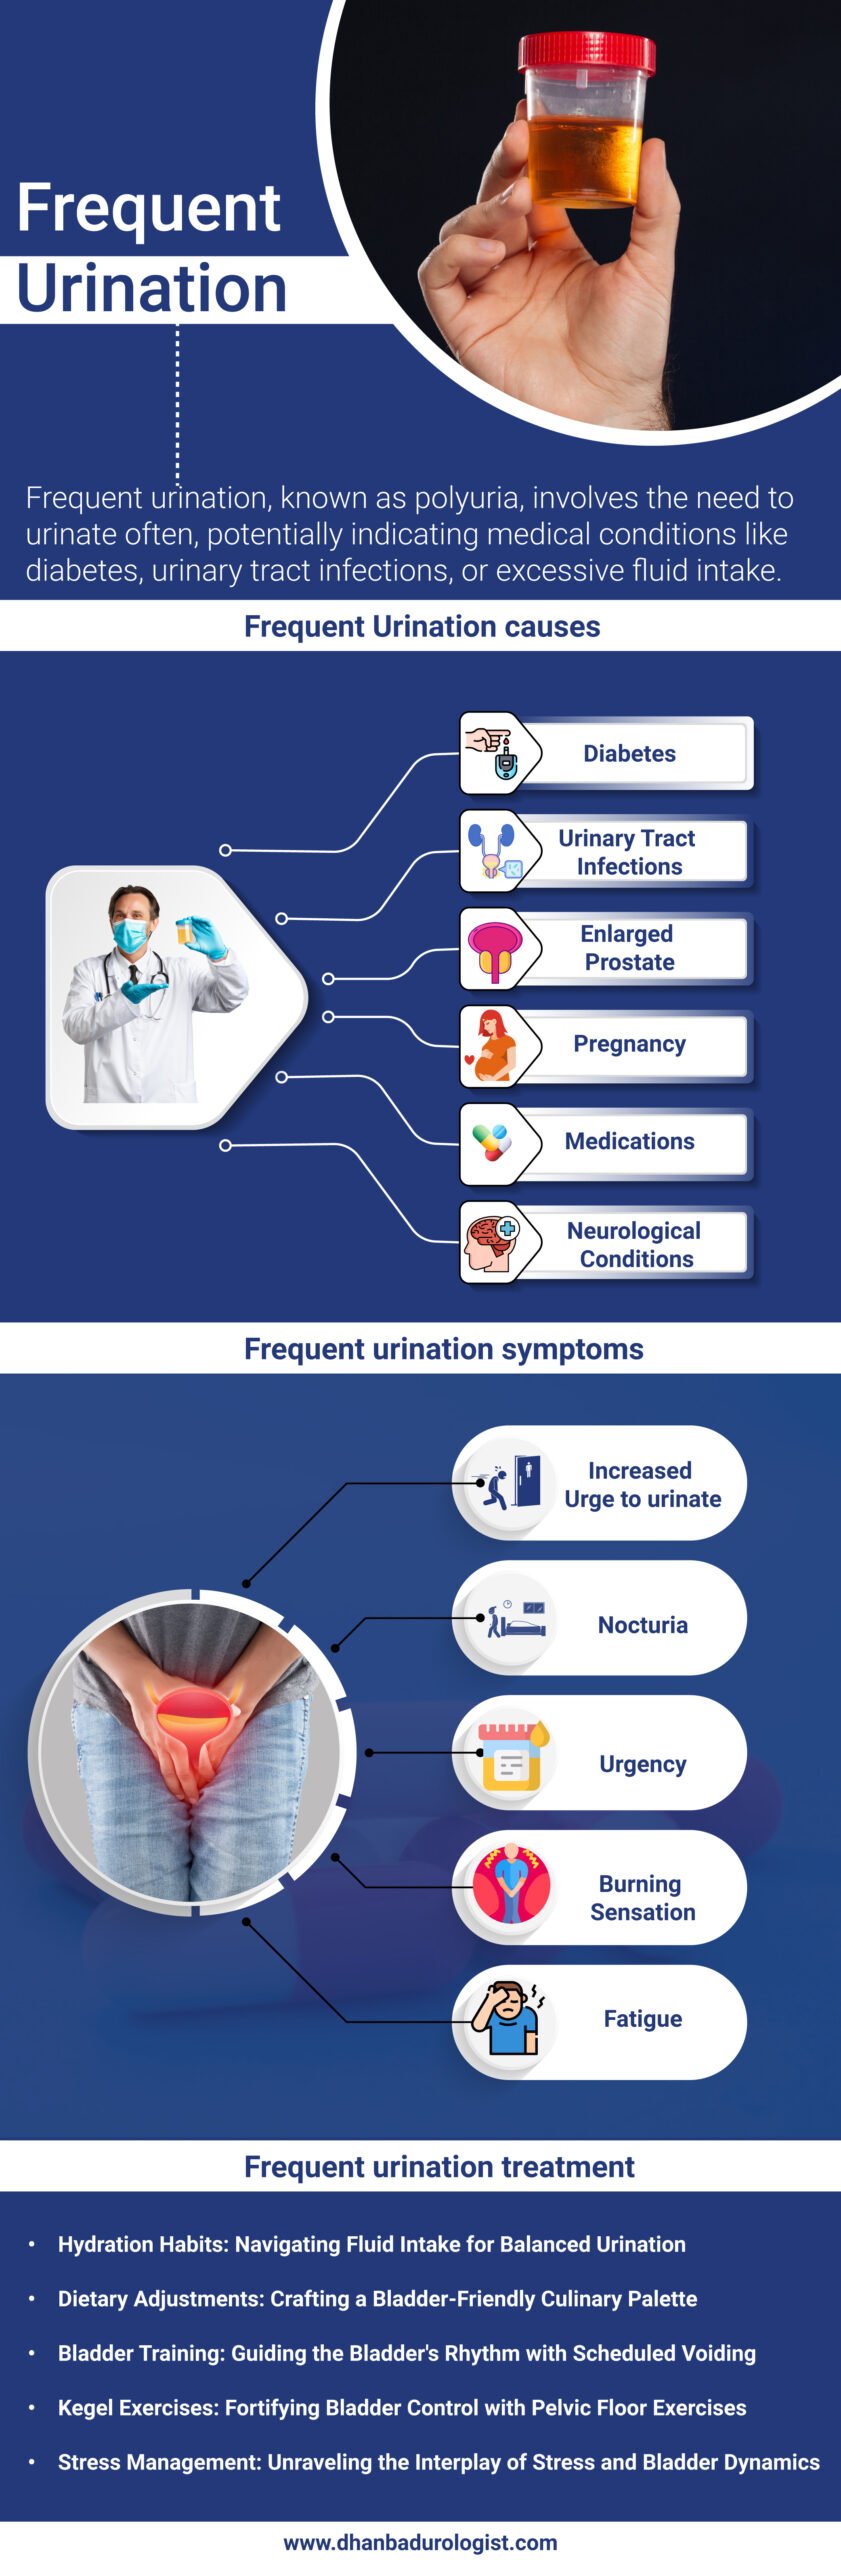 Frequent Urination 101: Symptoms, Causes, Treatment - Homage Malaysia